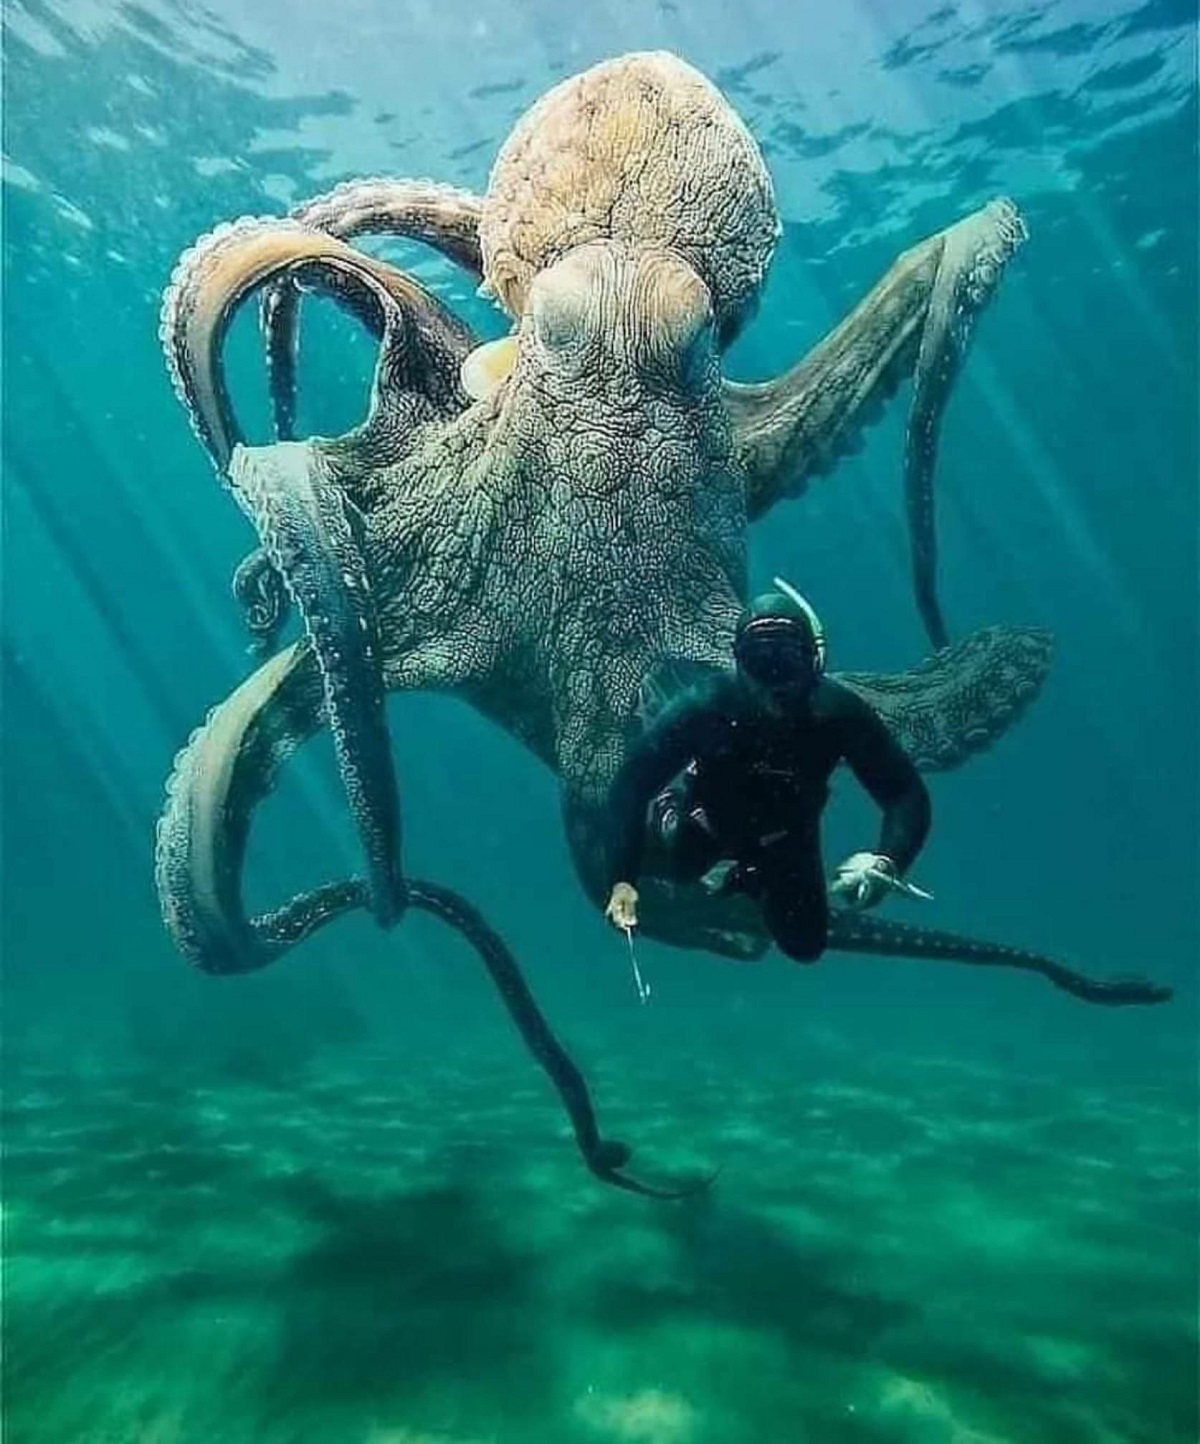 Imagine Just Enjoying A Swim Underwater And This Big Boy Coming Up Behind You